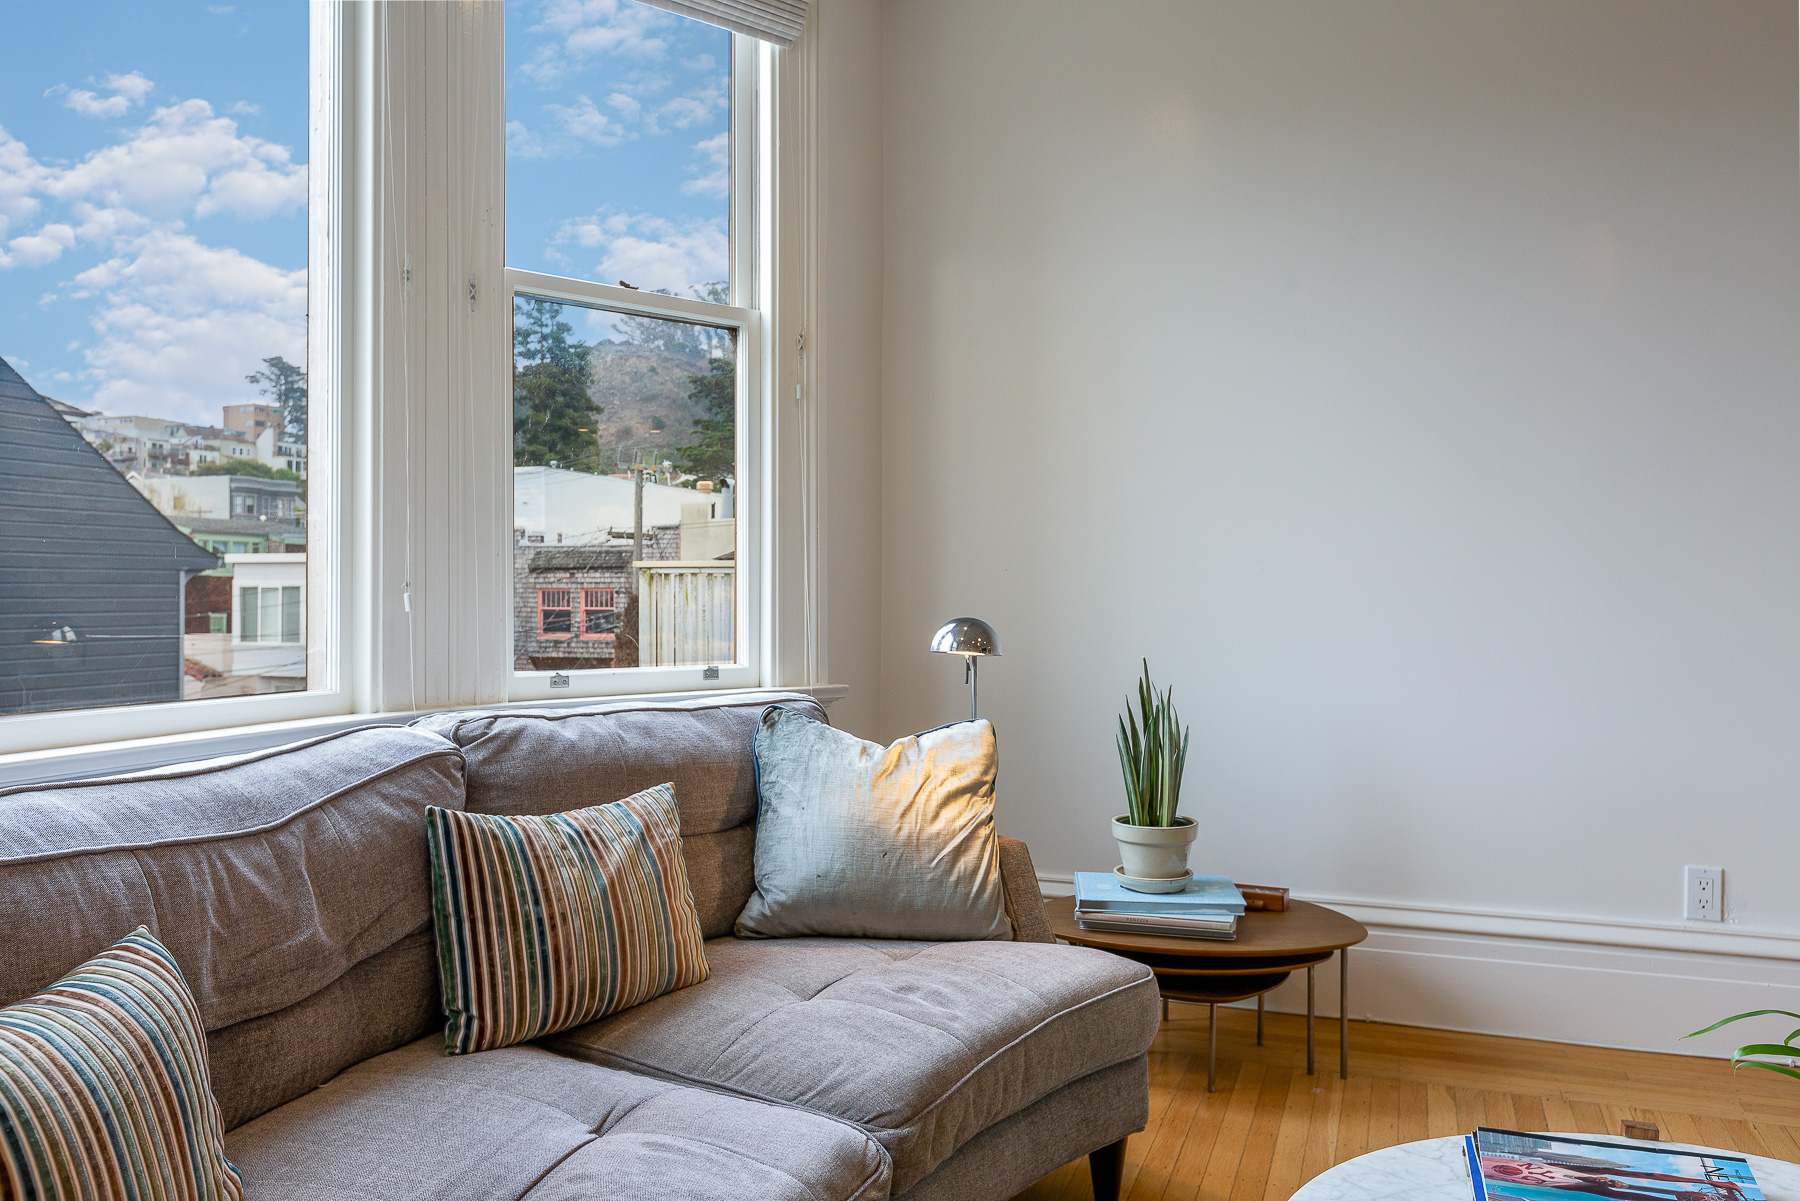 Property Photo: Close-up view of the living room sitting area with a view of Cole Valley beyond